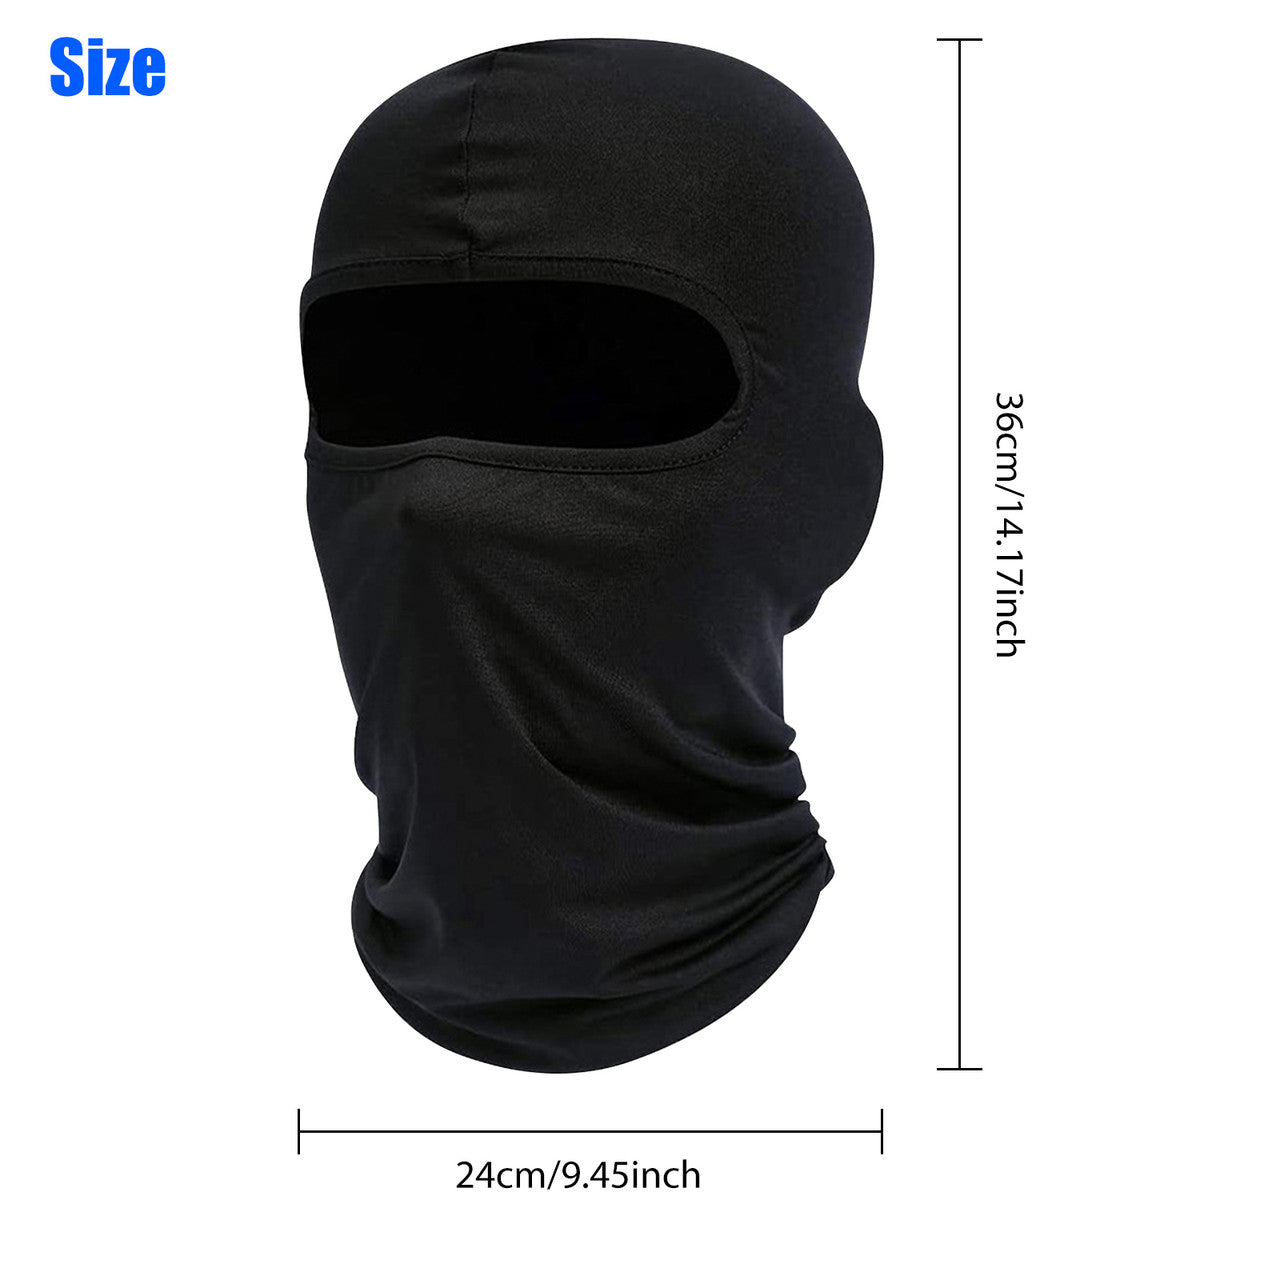 3 Packs Balaclava Face Mask - Bicycle Motorcycle Mask Windproof Camouflage Fishing Cap Face Cover for Sun Dust Protection